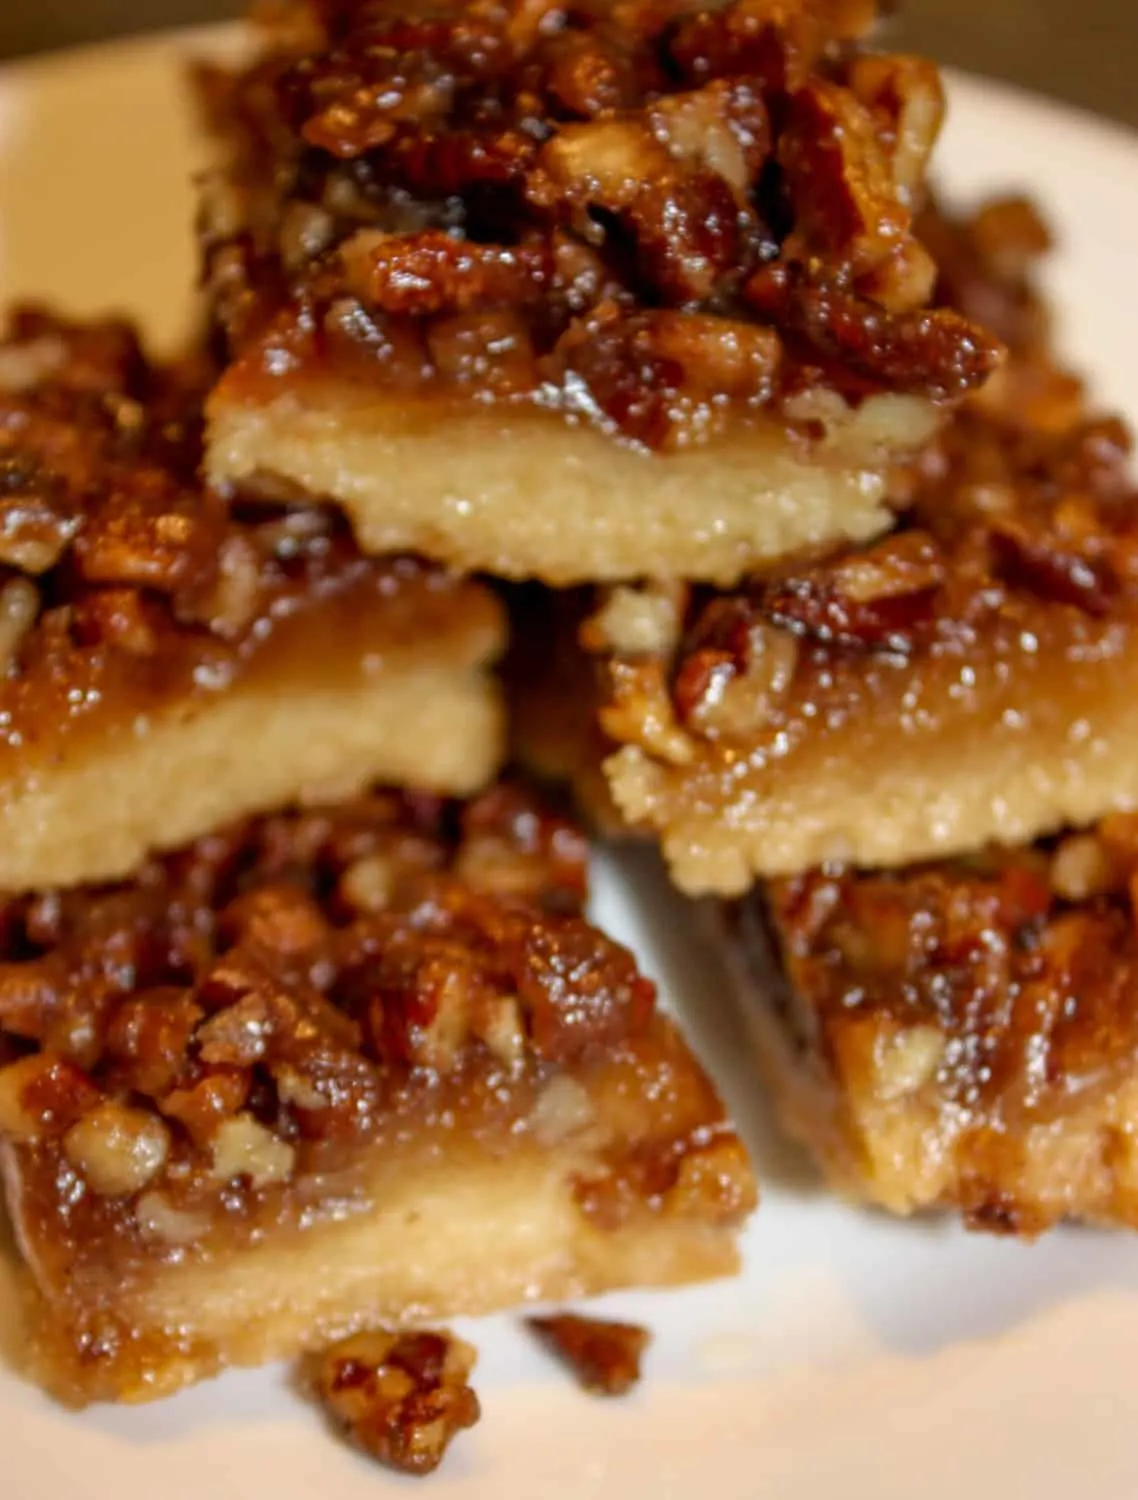 Pecan Pie Squares are a chewy, flavourful dessert square that will be a perfect addition to your holiday dessert tray.  This gluten free version will surprise your guests that are able to consume a regular diet.